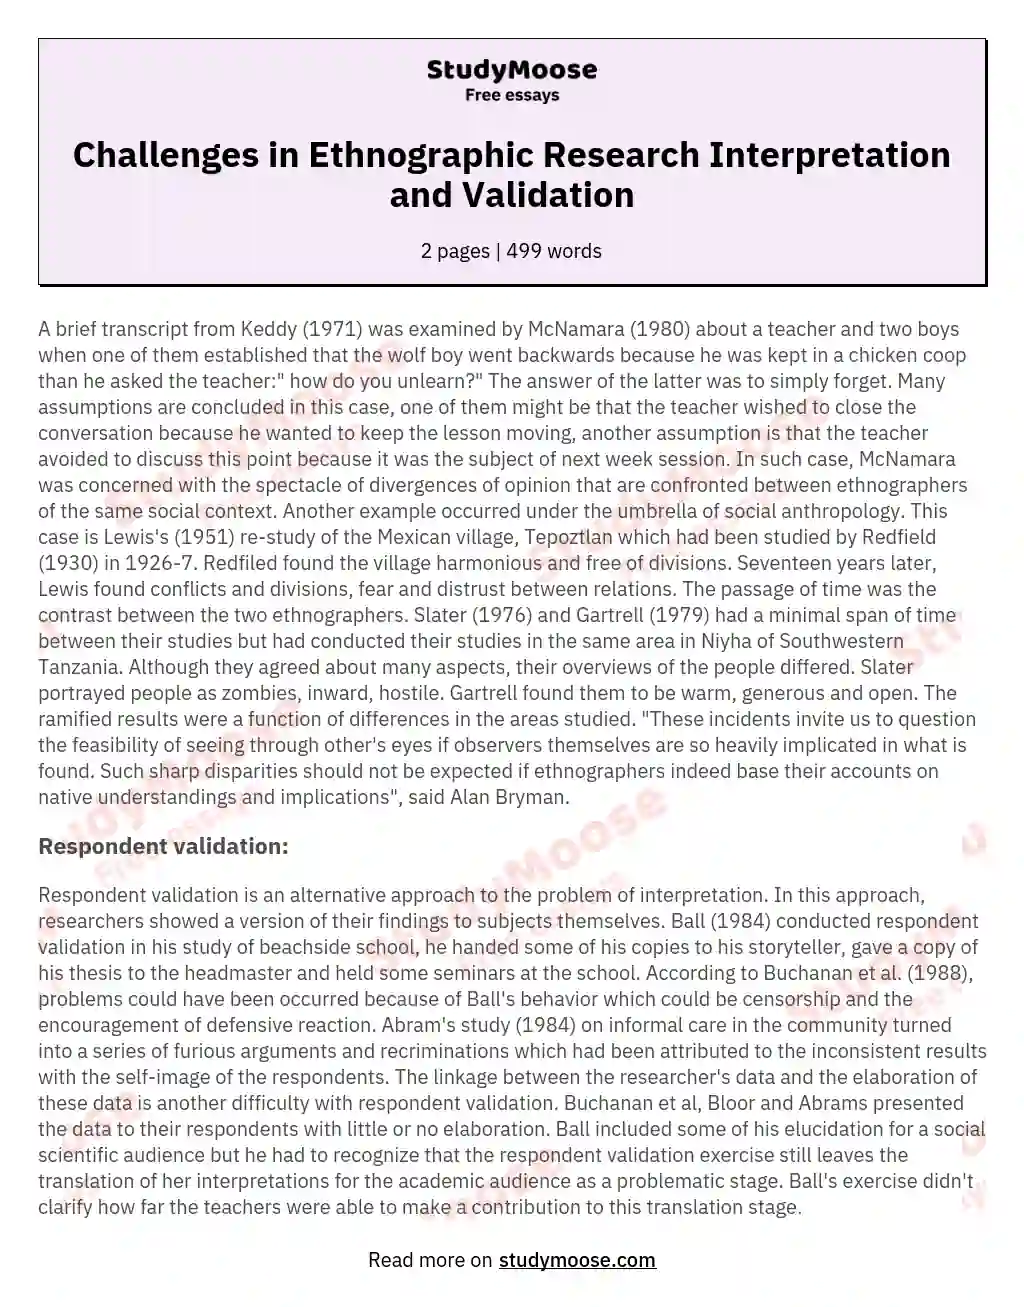 Challenges in Ethnographic Research Interpretation and Validation essay